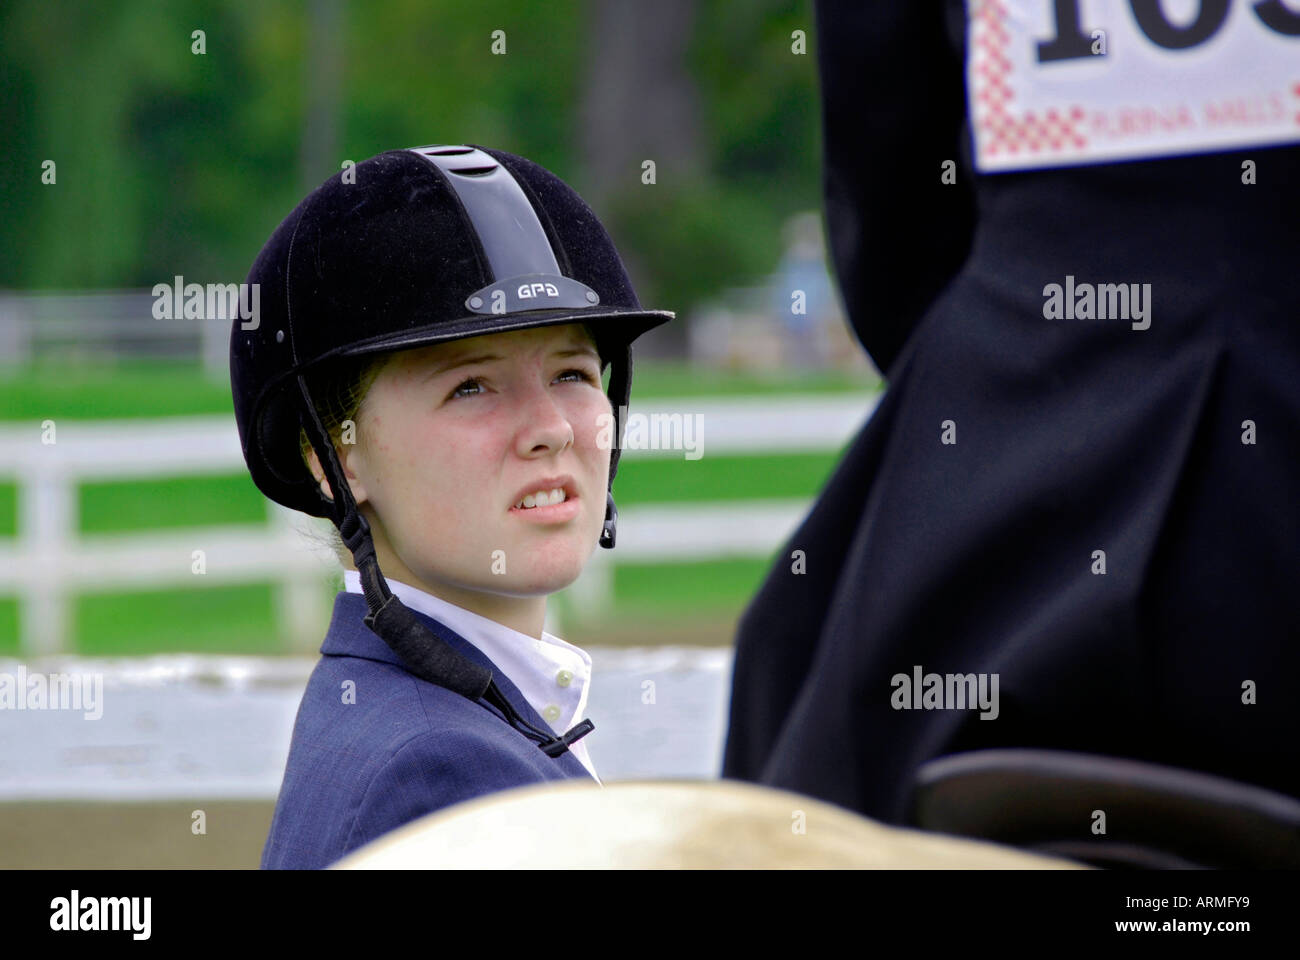 High school female student competes in equestrian event Stock Photo